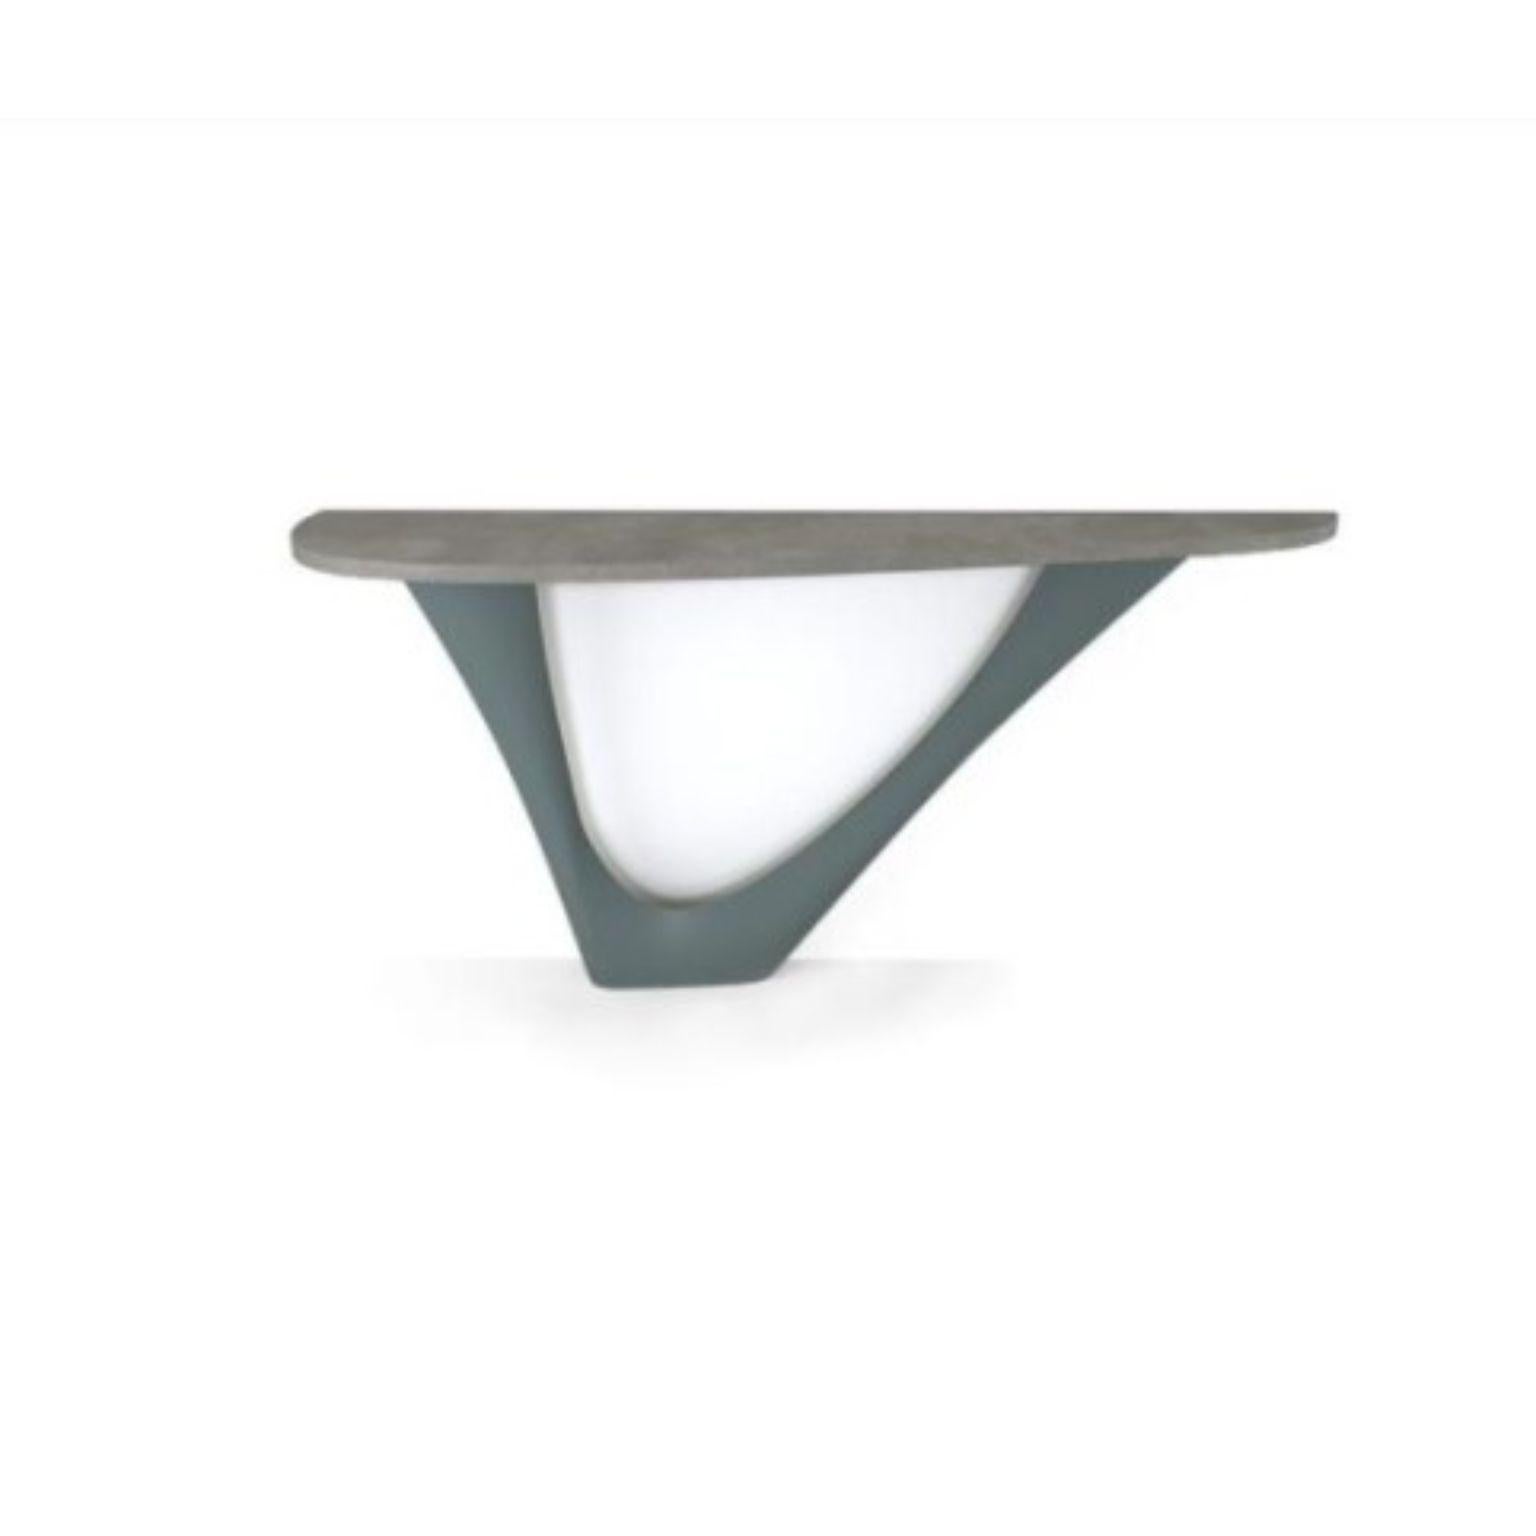 Blue grey G-console mono steel base with concrete top by Zieta
Dimensions: D 43 x W 159 x H 75 cm.
Material: concrete, carbon steel.
Also available in different colors and dimensions.

G-Console is another bionic object in our collection. Created